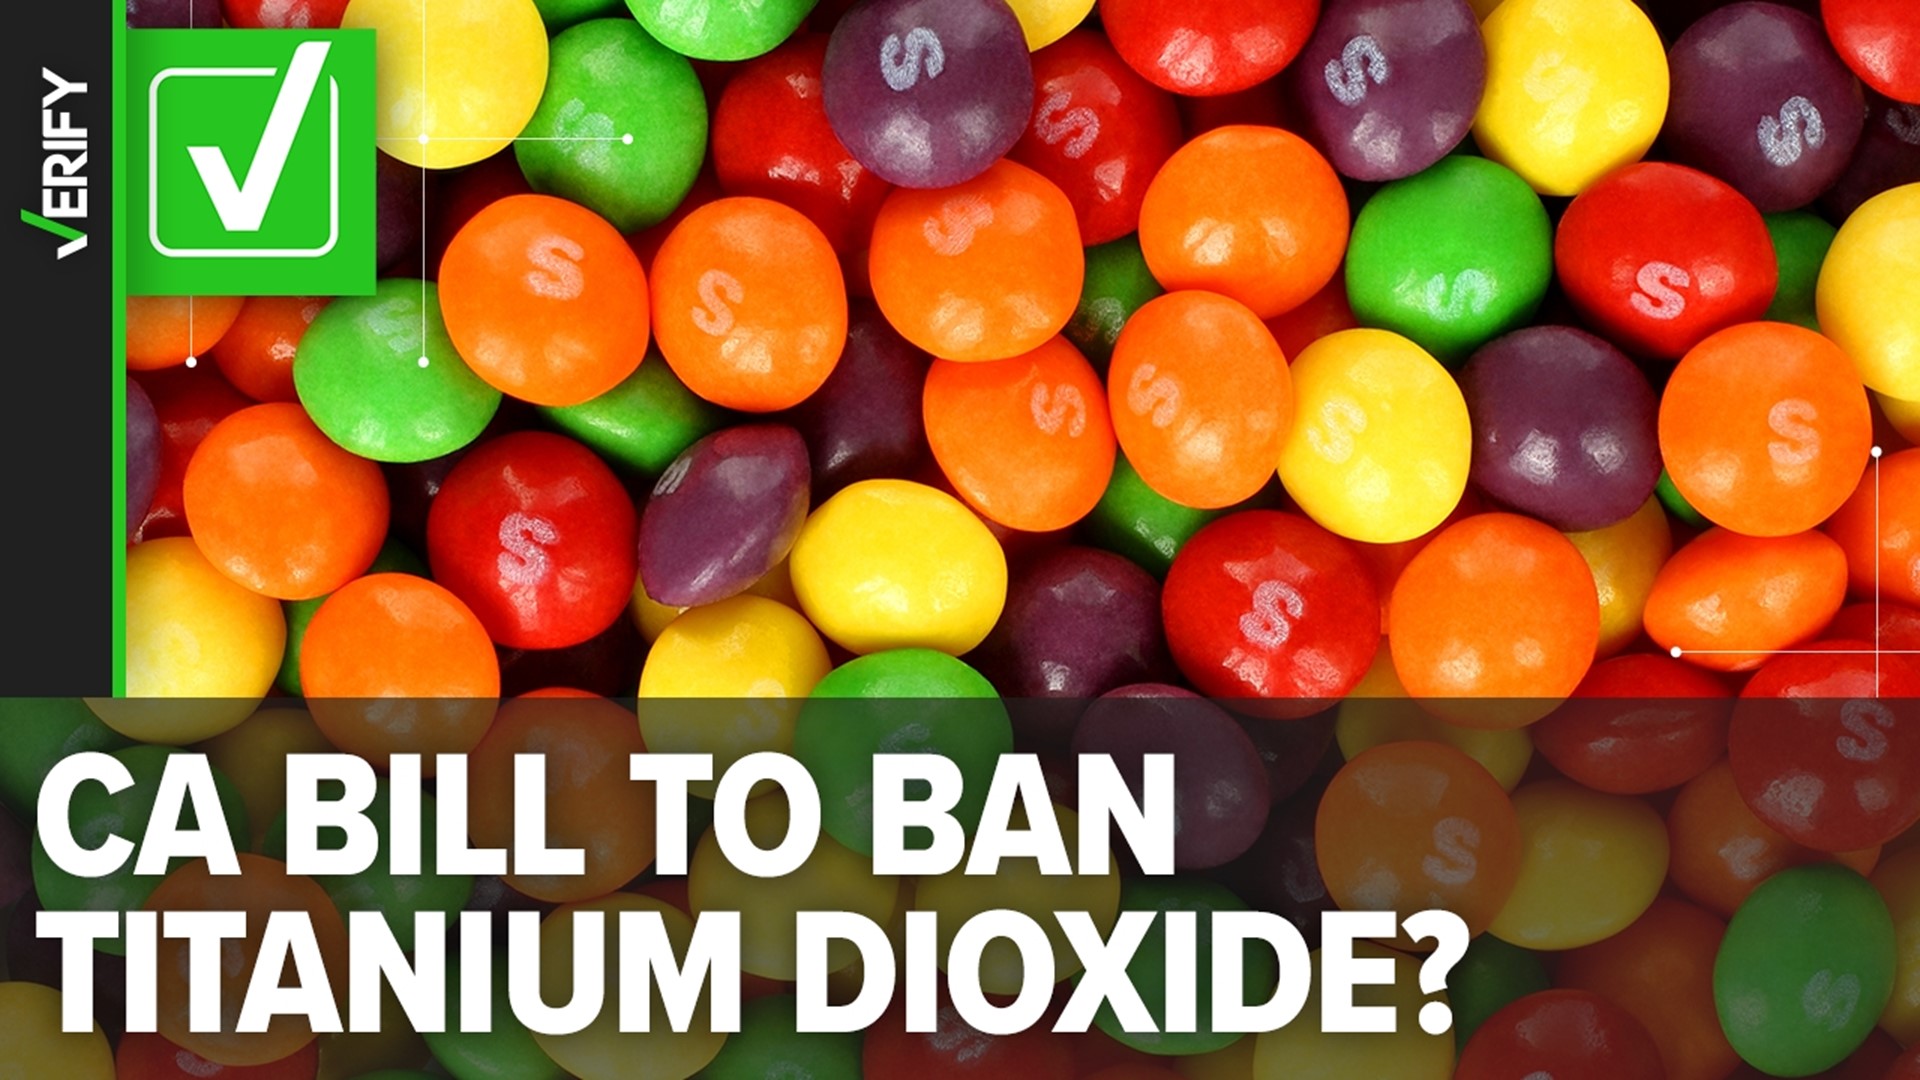 A proposed California bill would ban the sale of food products like candy that contain titanium dioxide, red dye No. 3 and other additives.